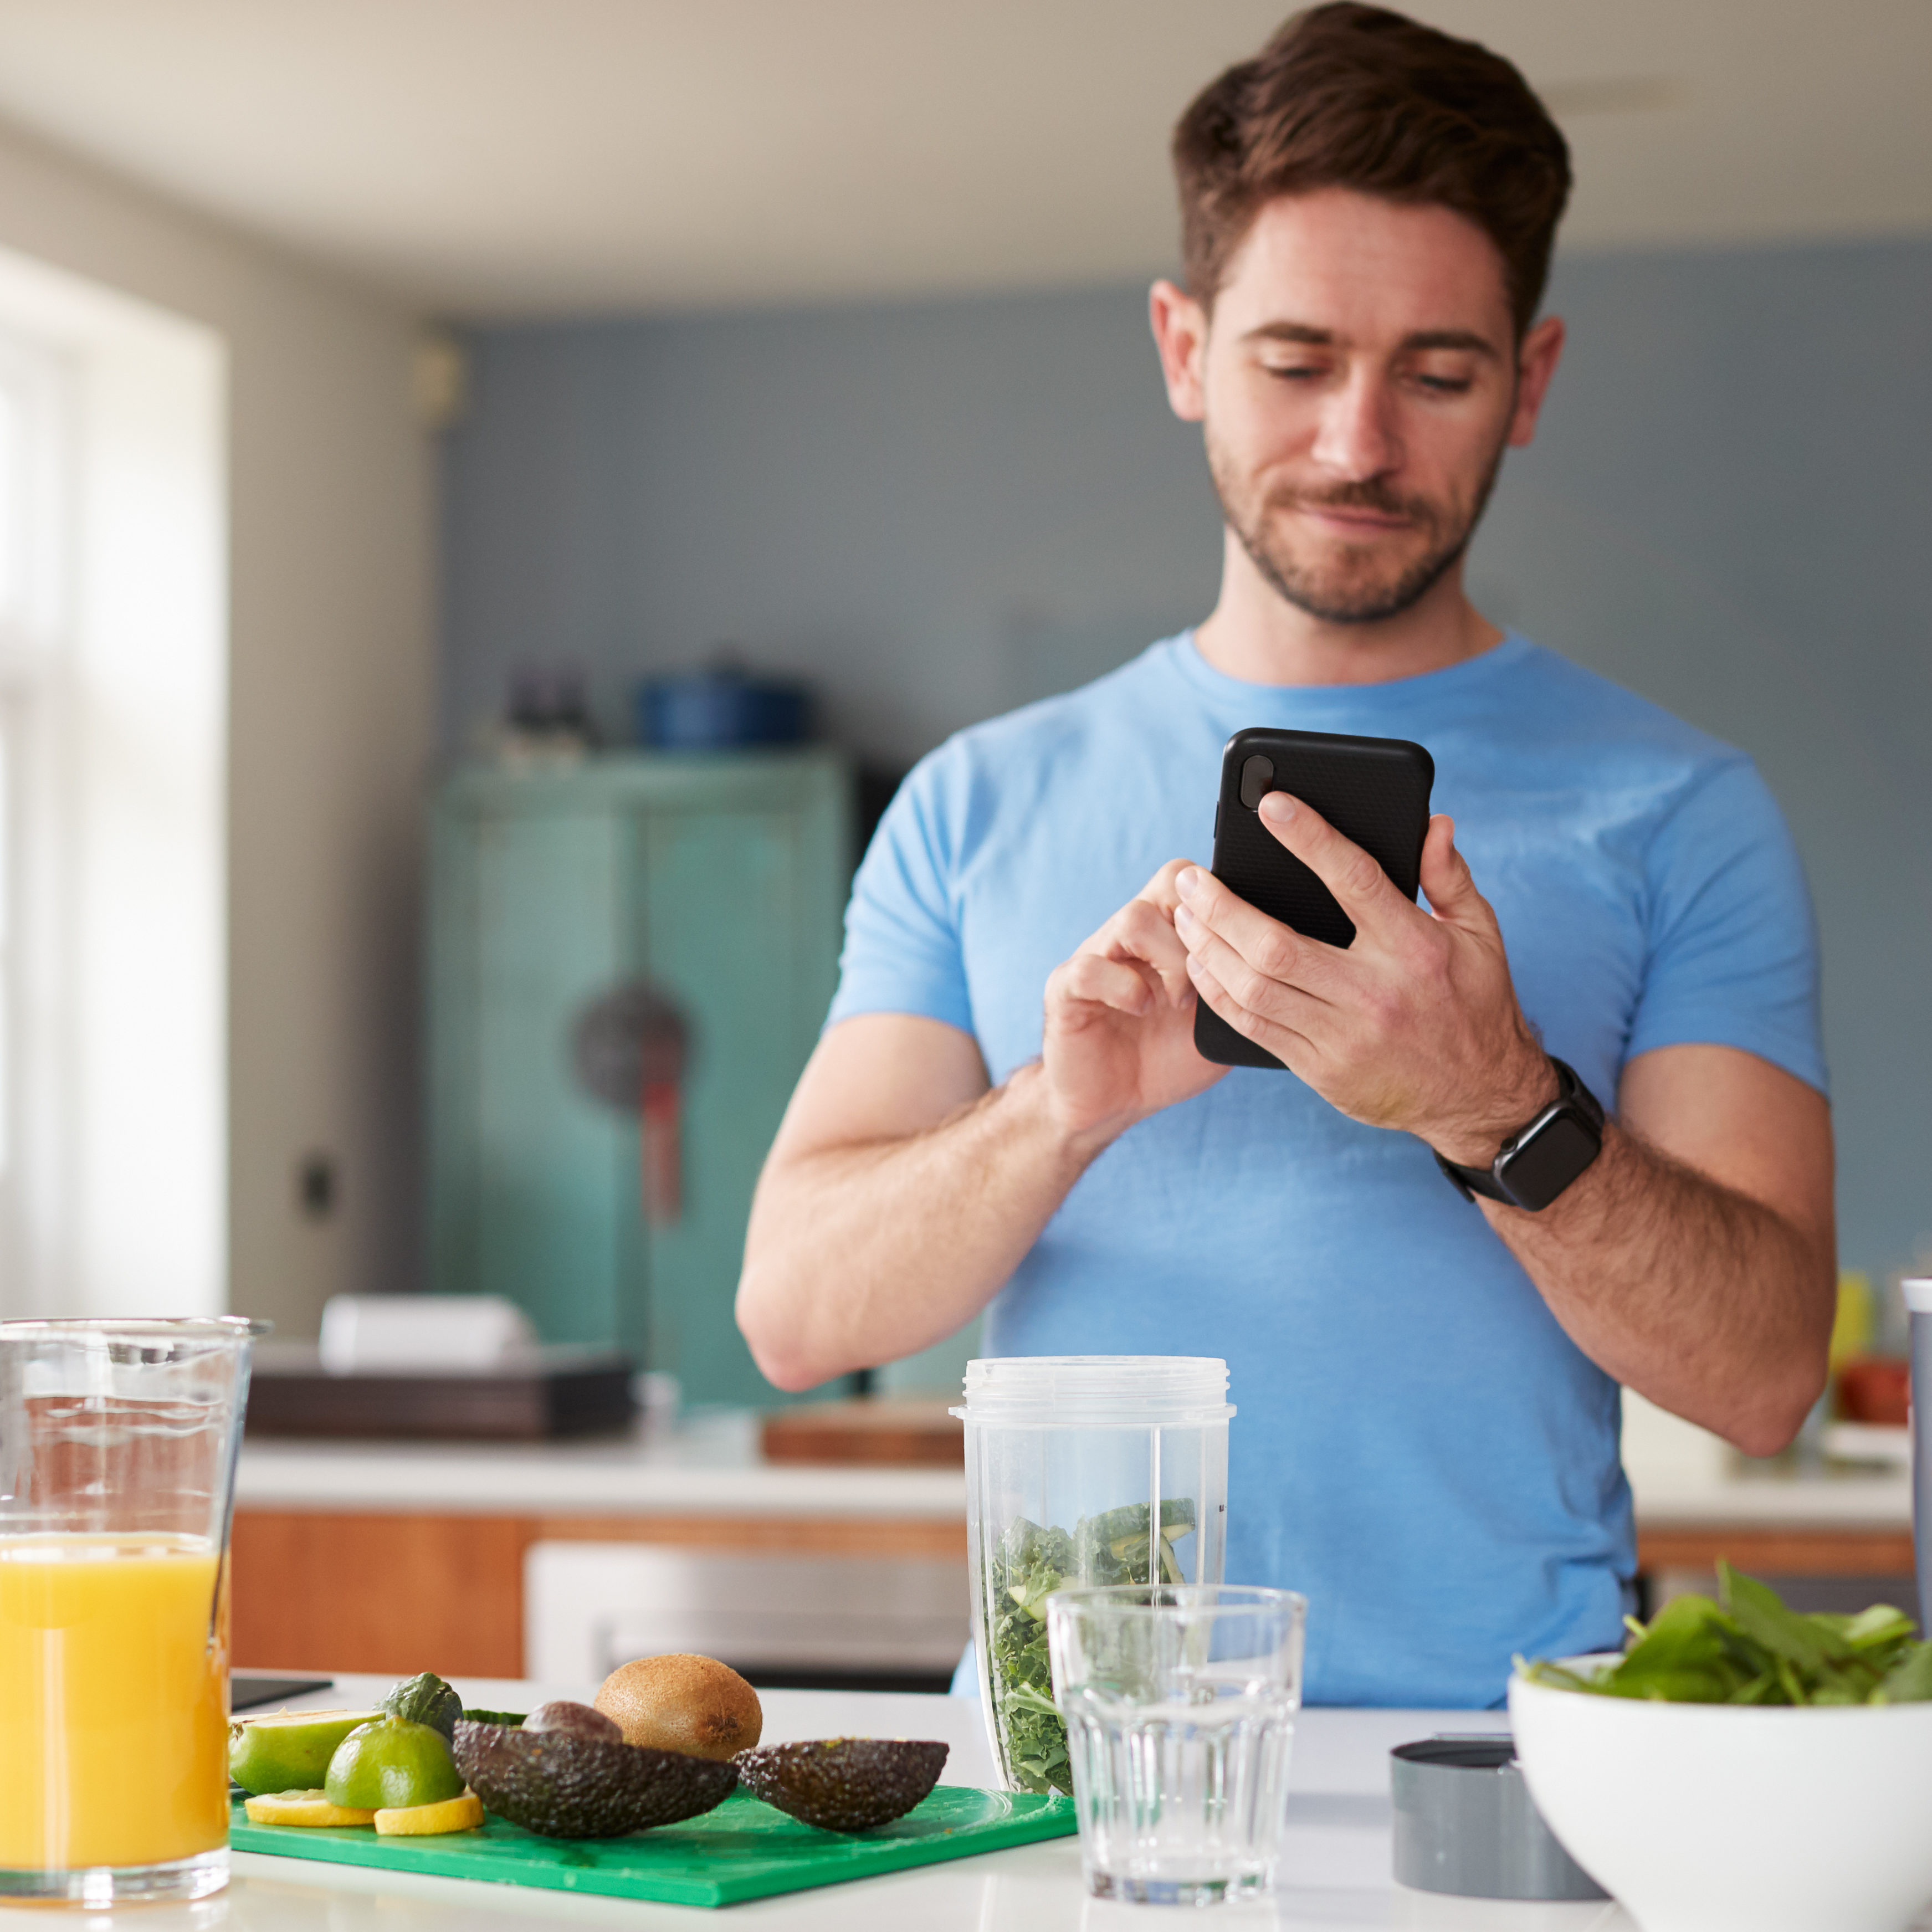 Man Using Fitness Tracker To Count Calories For Post Workout Juice Drink He Is Making